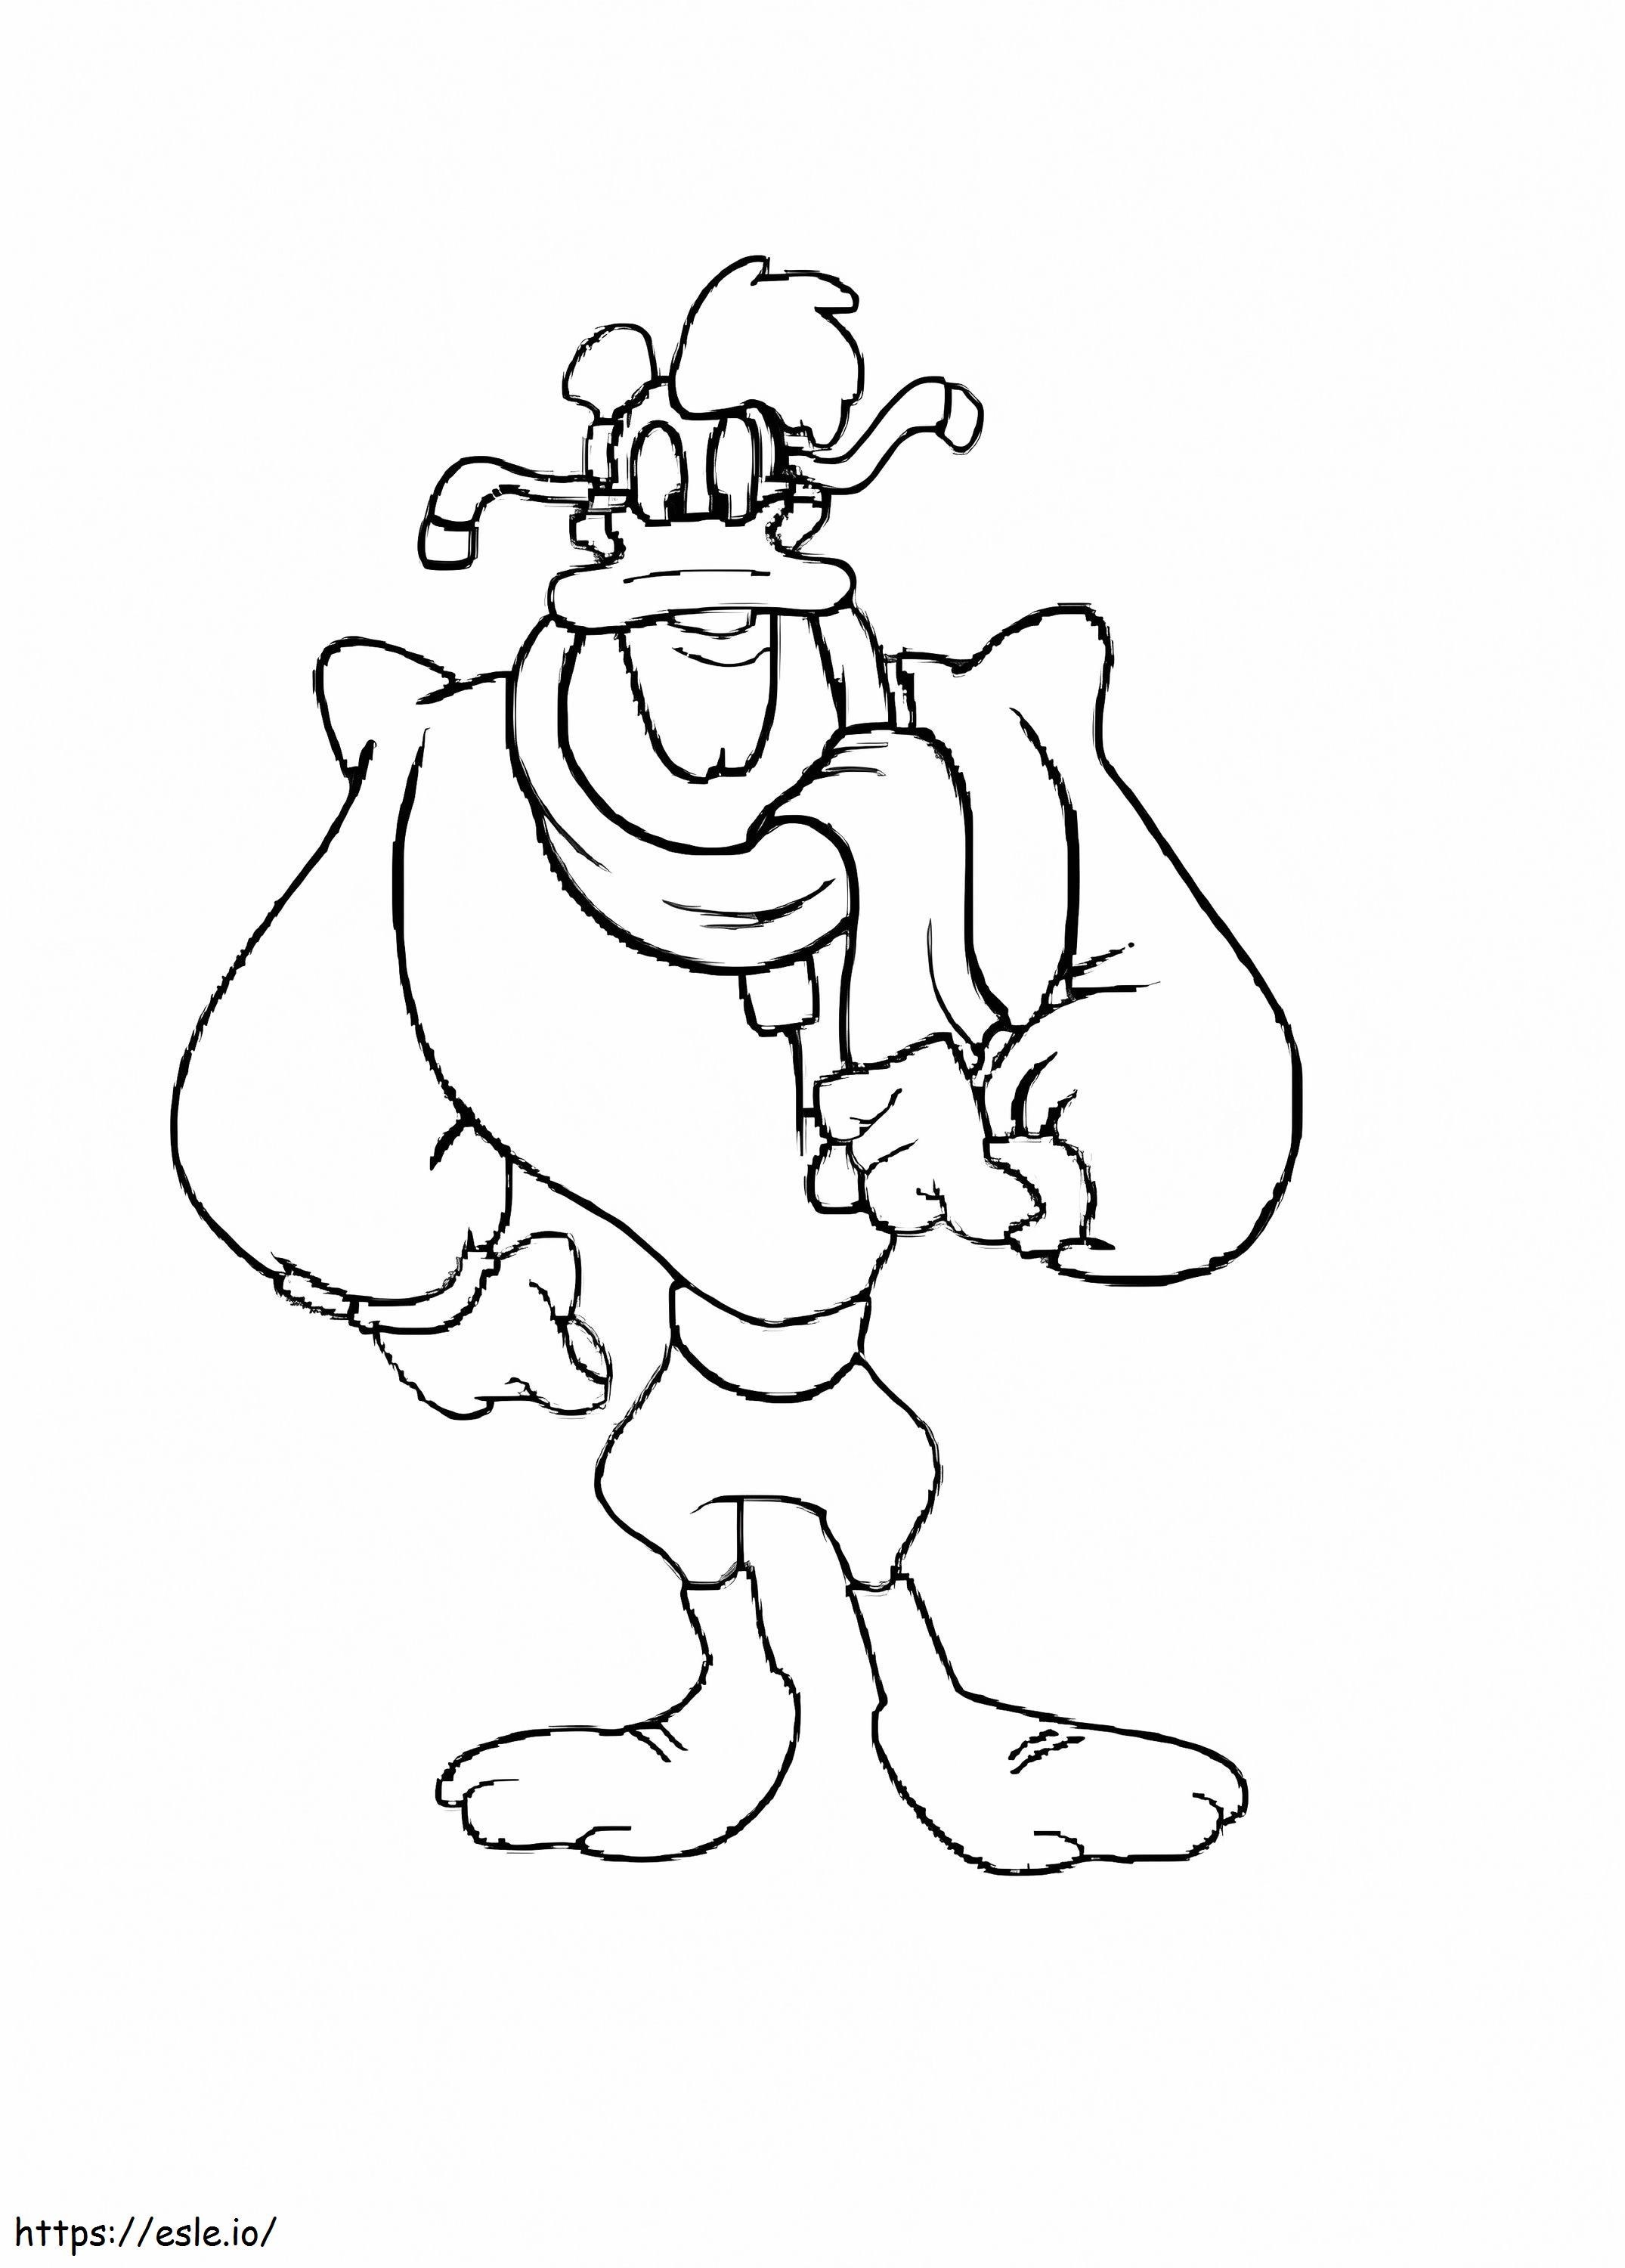 Launchpad McQuack From Darkwing Duck coloring page